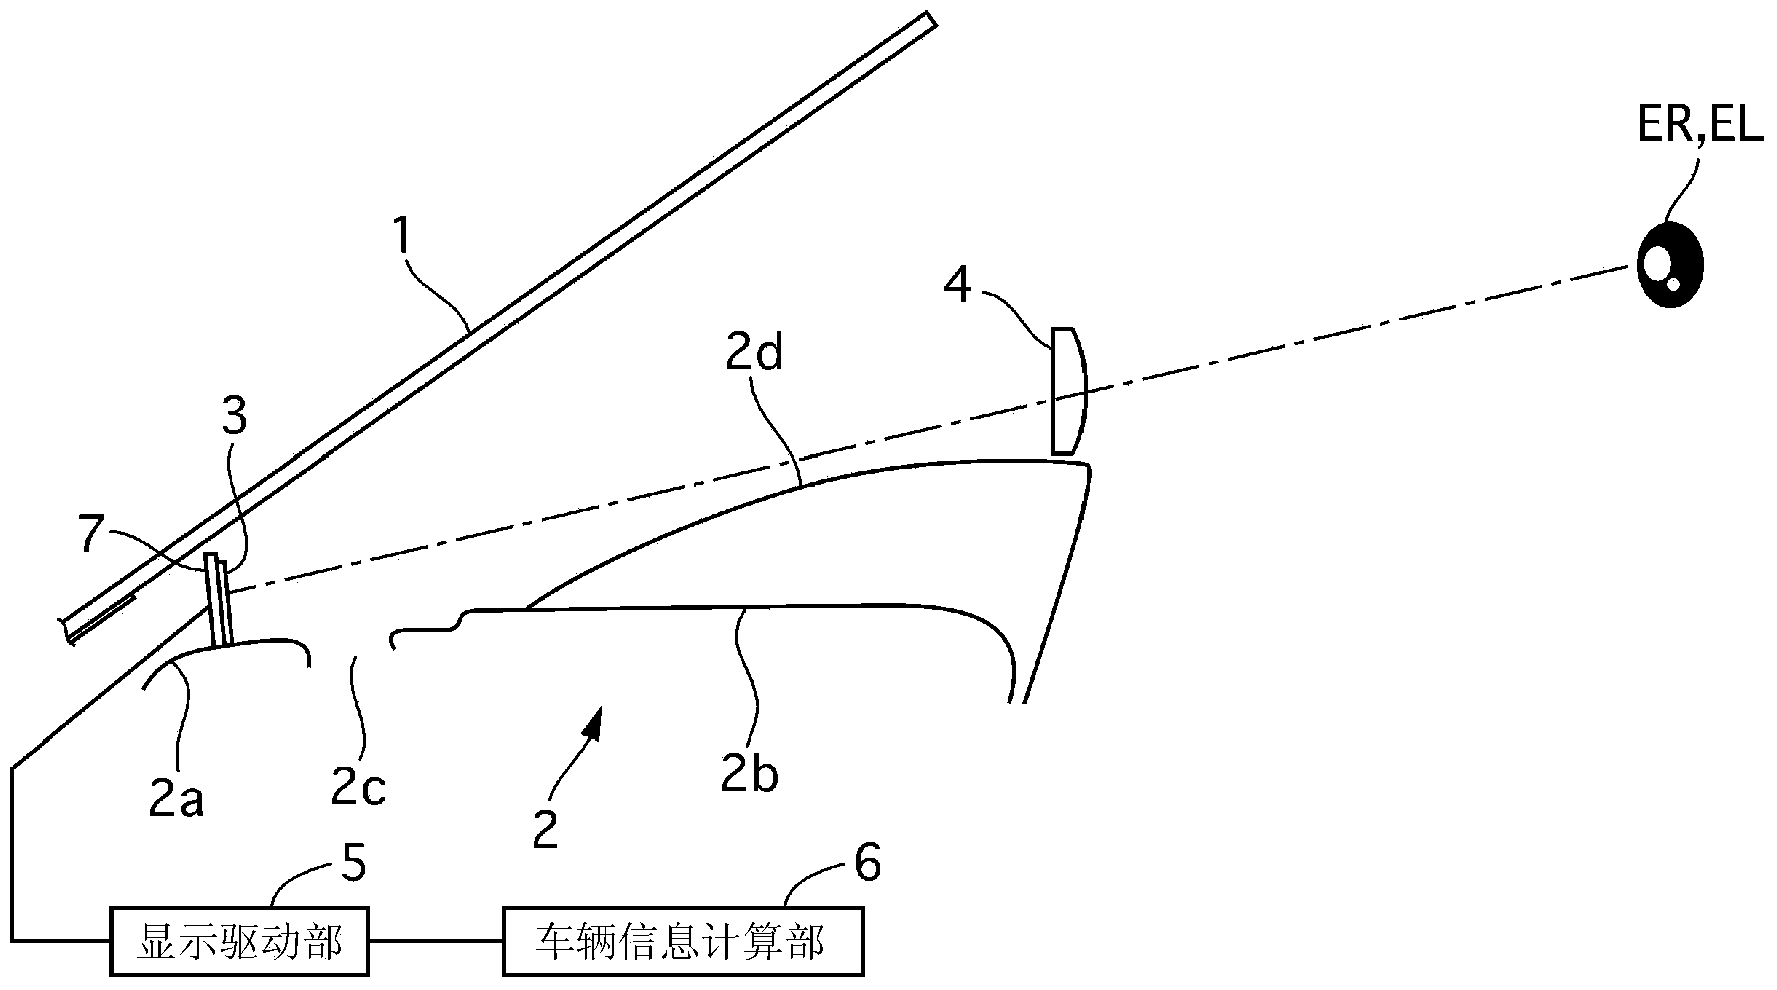 Display apparatus for vehicles